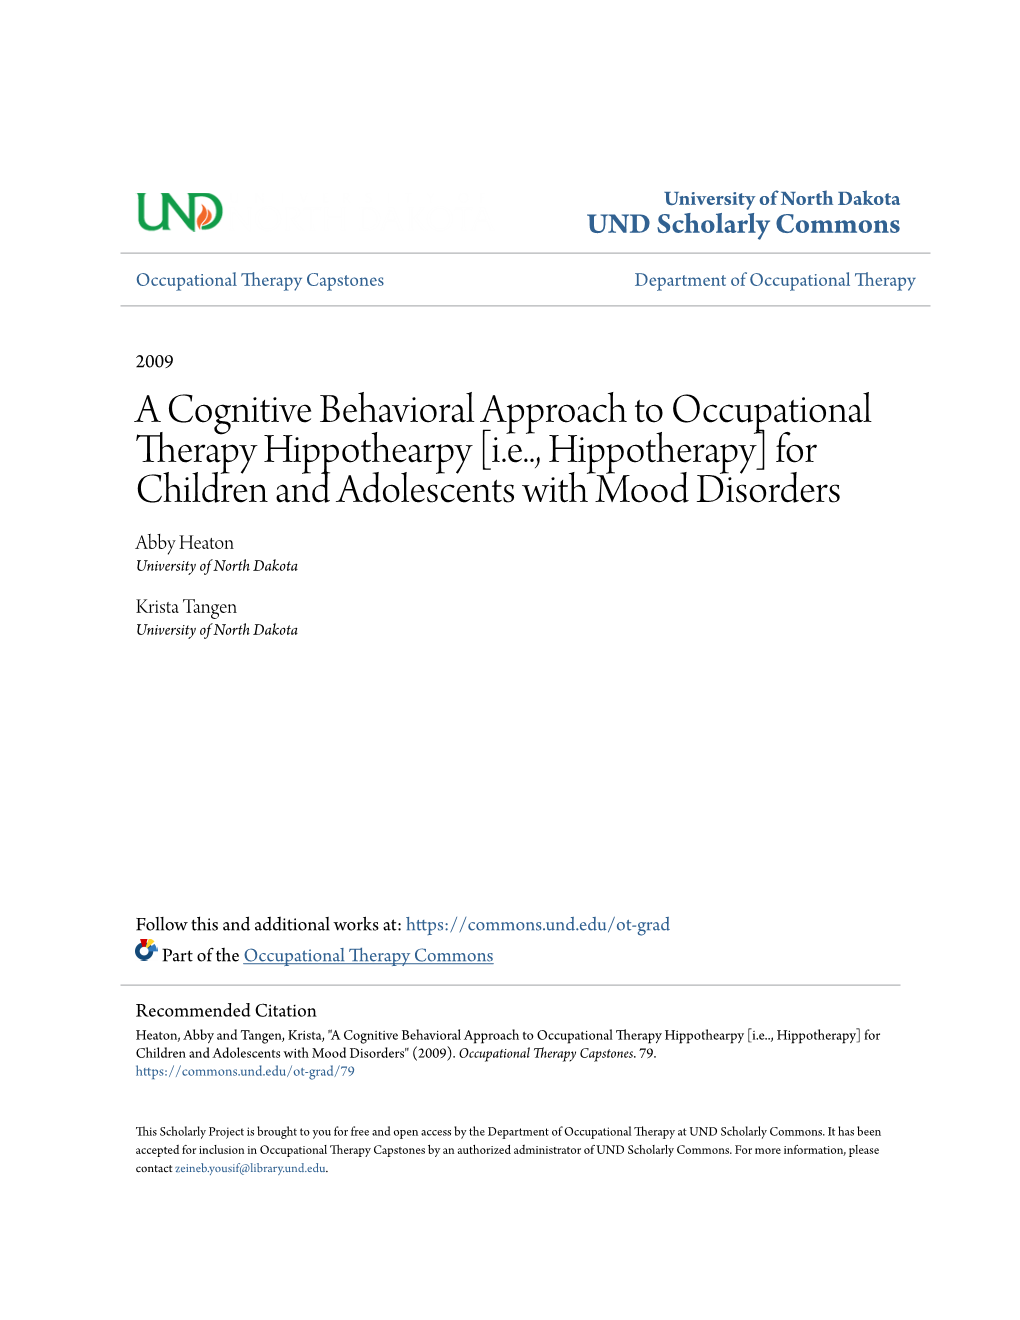 A Cognitive Behavioral Approach to Occupational Therapy Hippothearpy